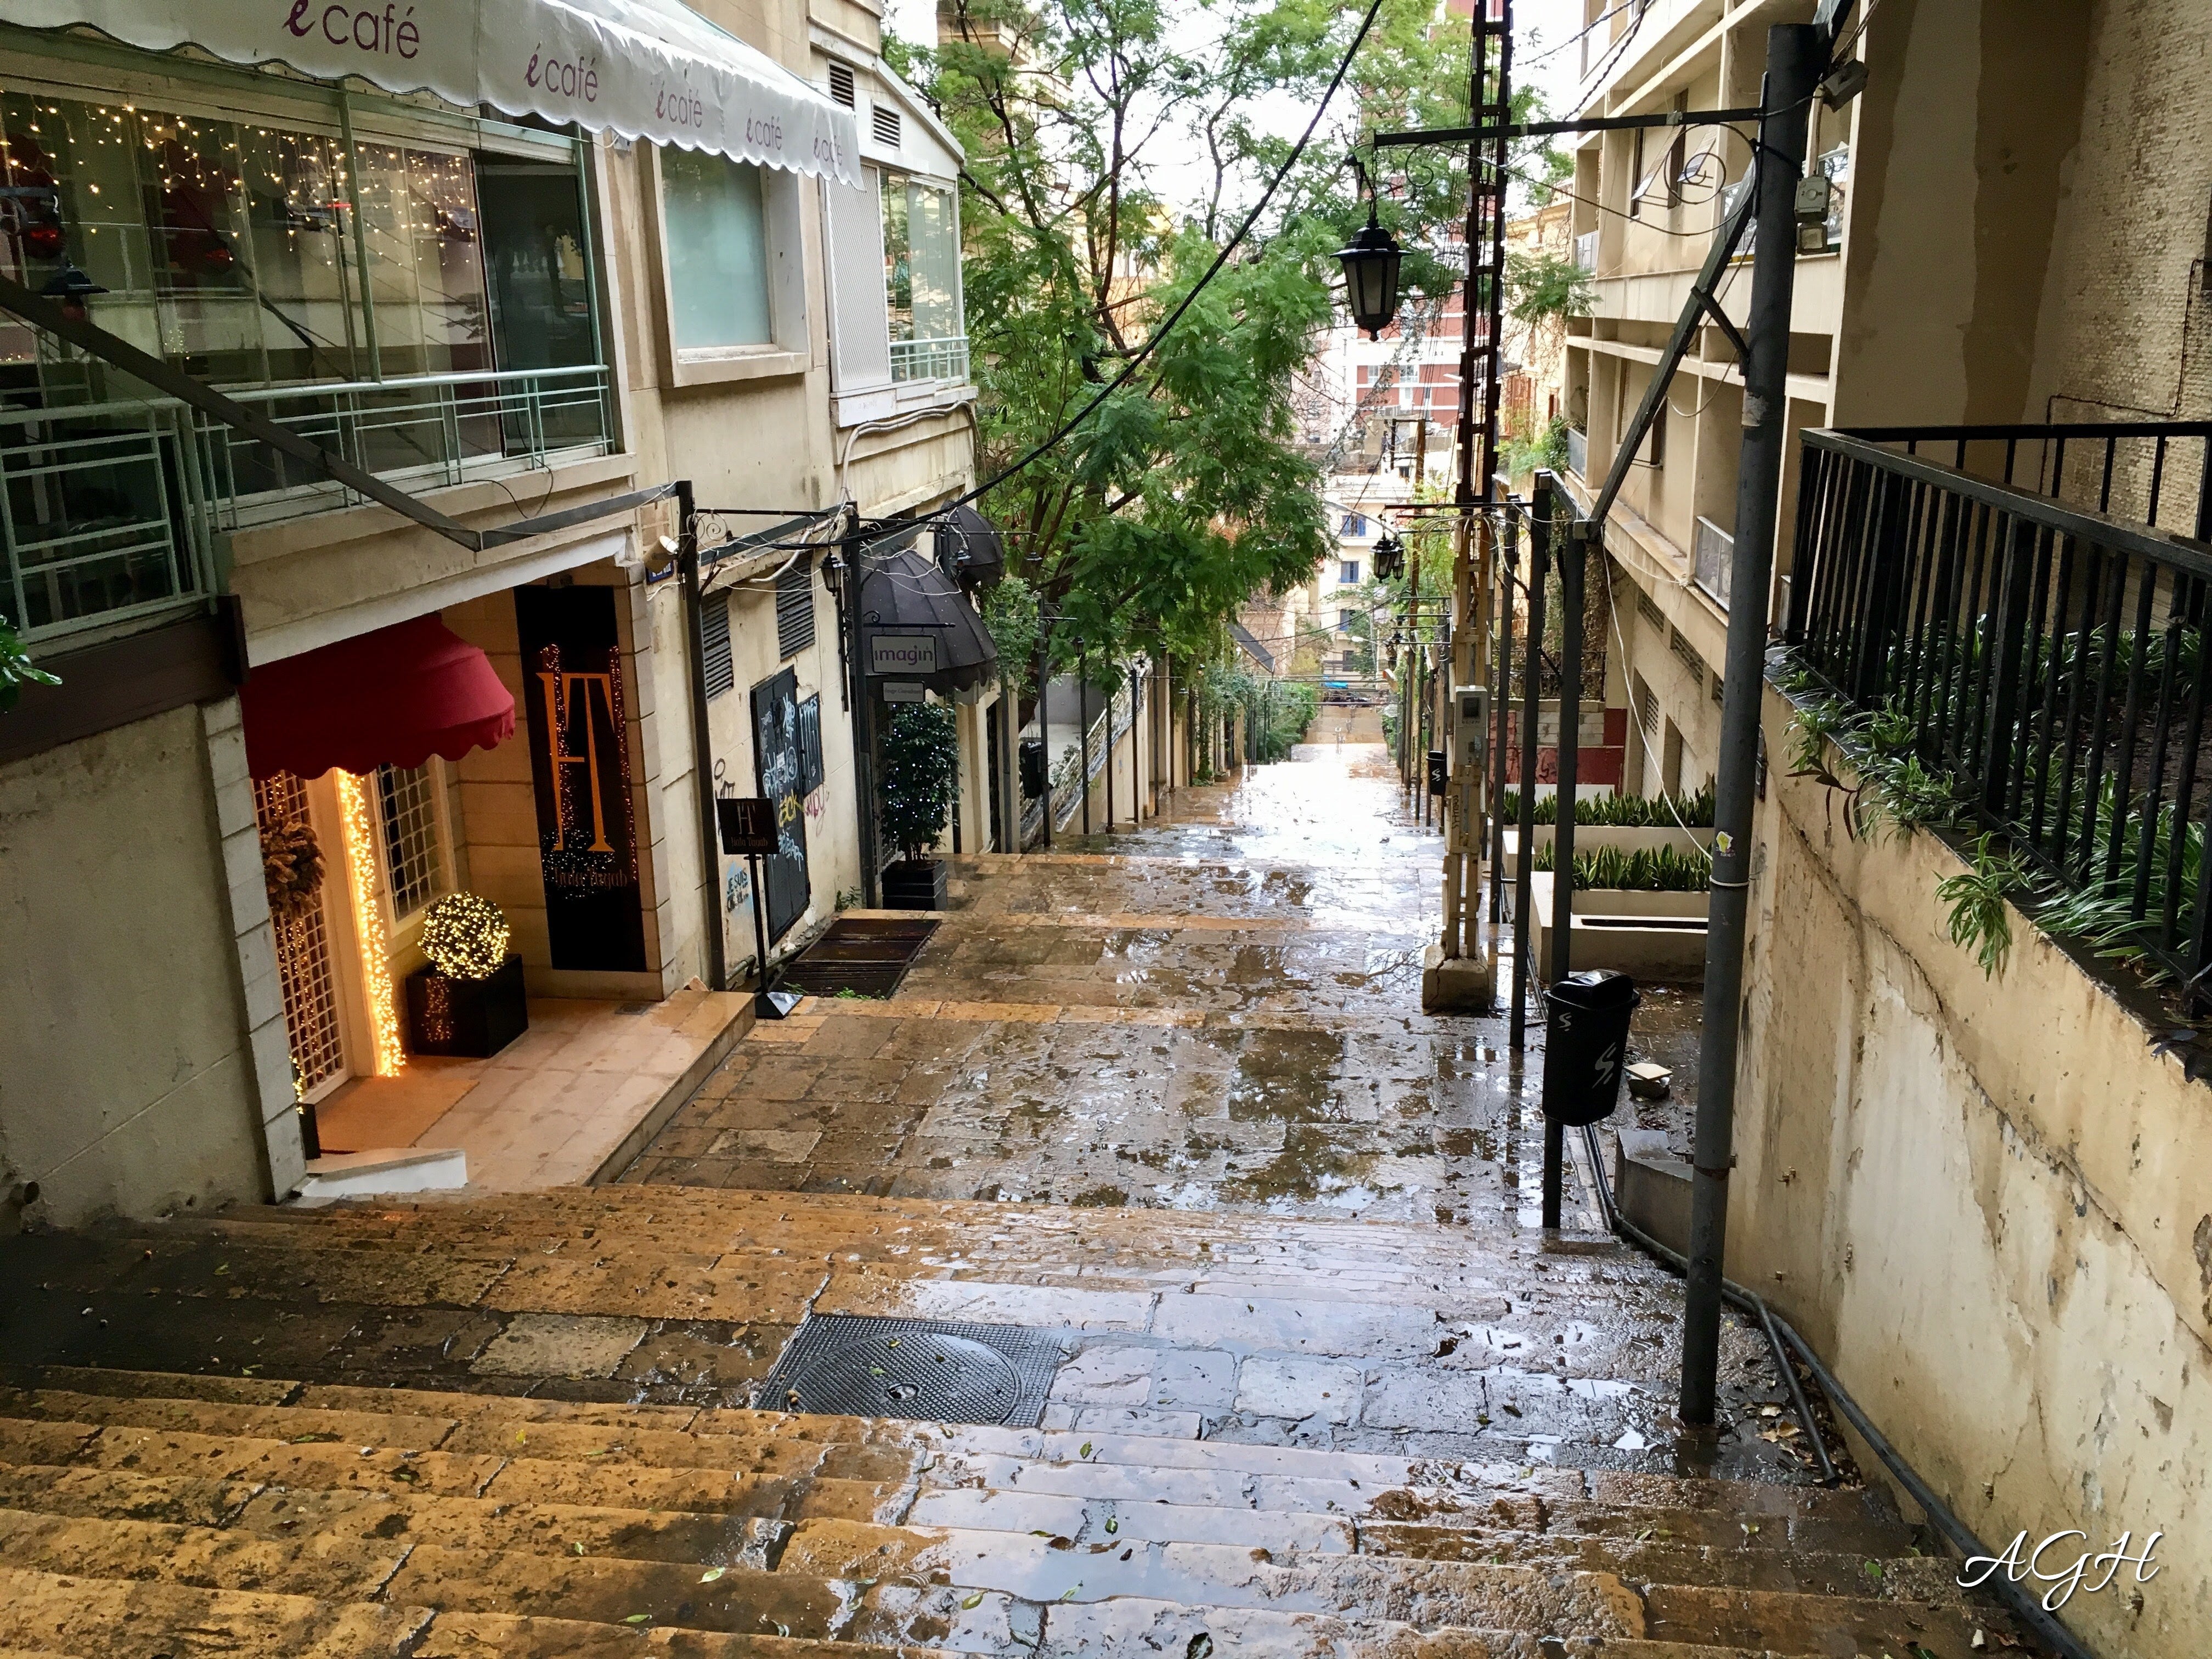 Looking down a street of steps in Beirut that is reminiscent of Paris.